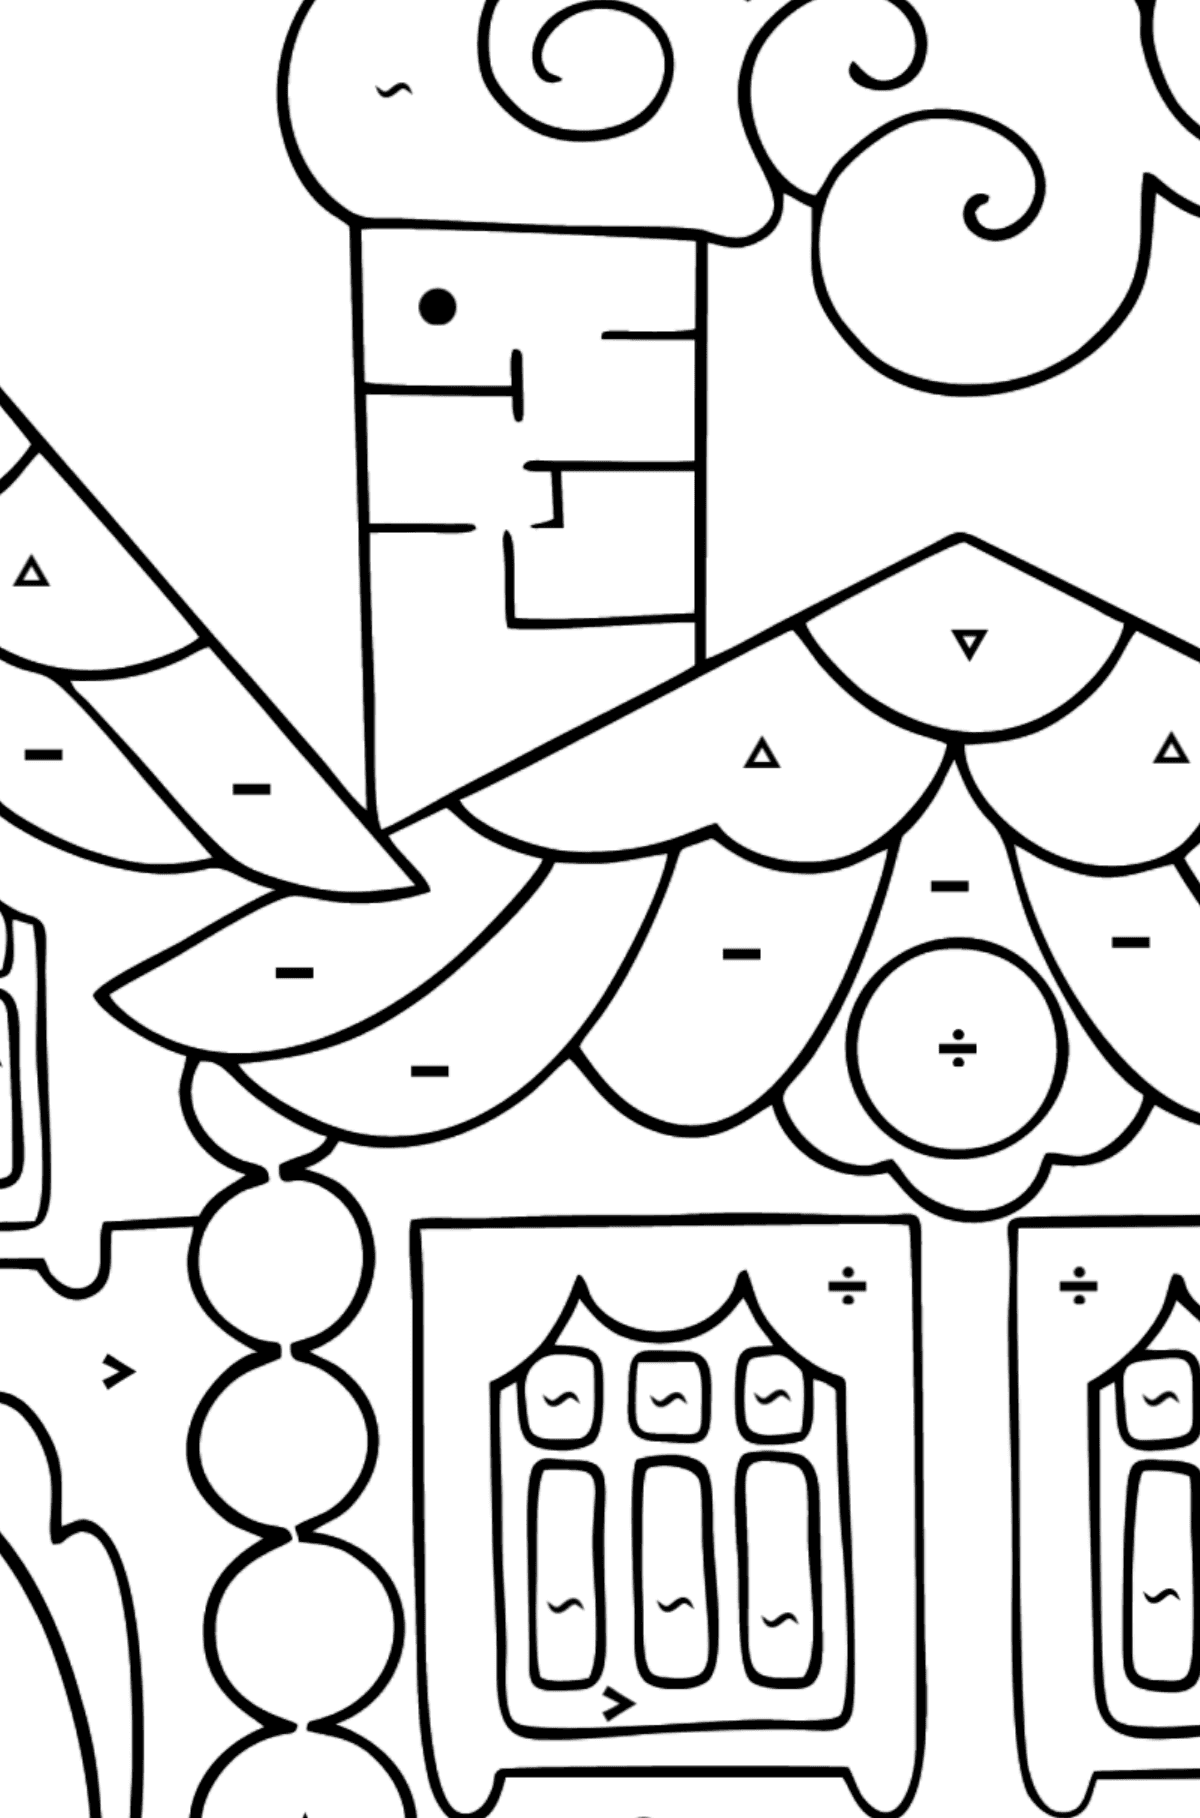 House in the Forest Coloring Page (difficult) - Coloring by Symbols for Kids